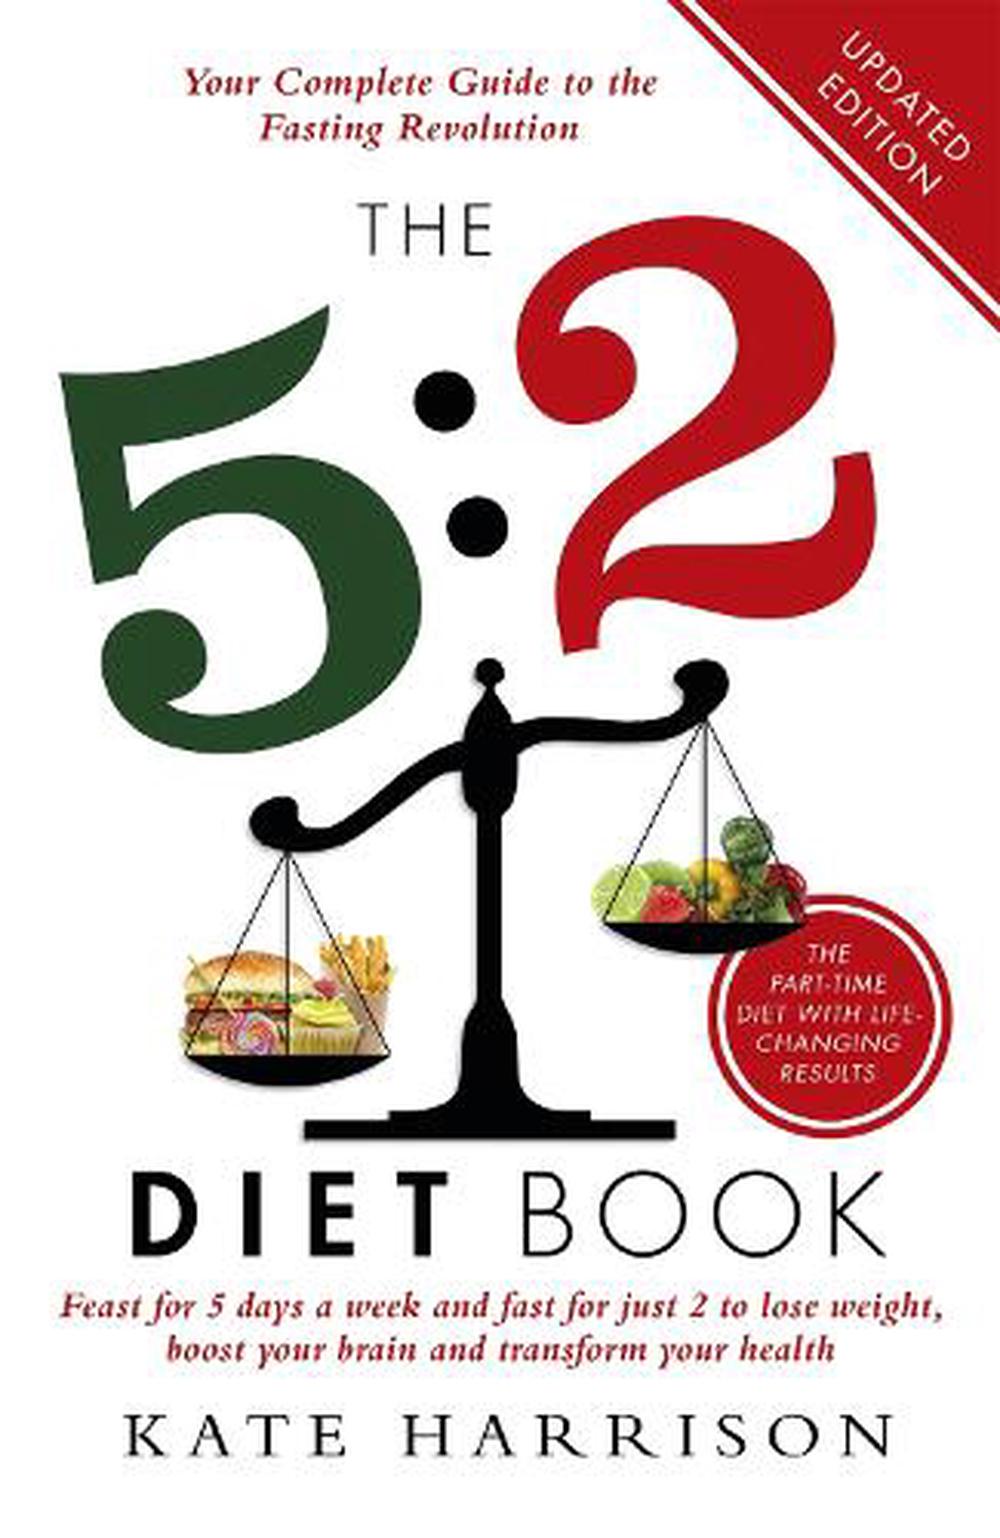 The 52 Diet Book by Kate Harrison, Paperback, 9781409146698 Buy